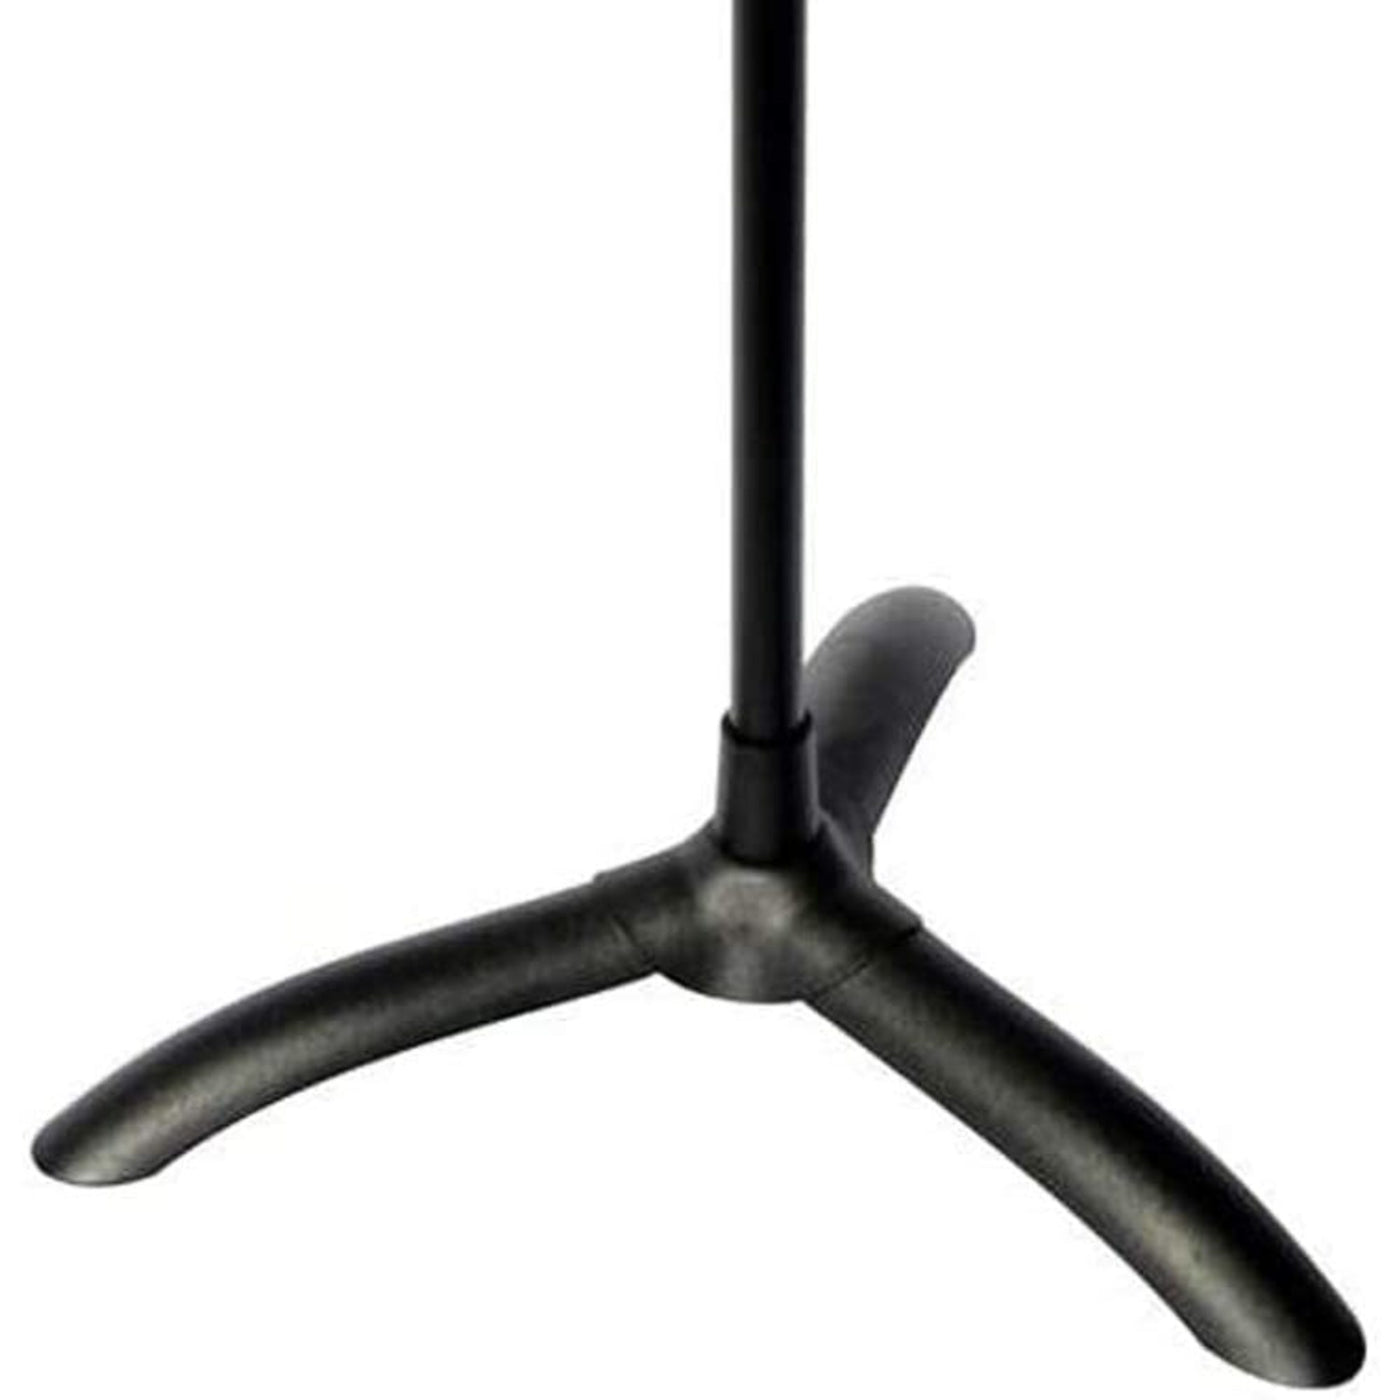 Manhasset Standard Symphony Stand with Plastic Desk, Box of 6 (8406)